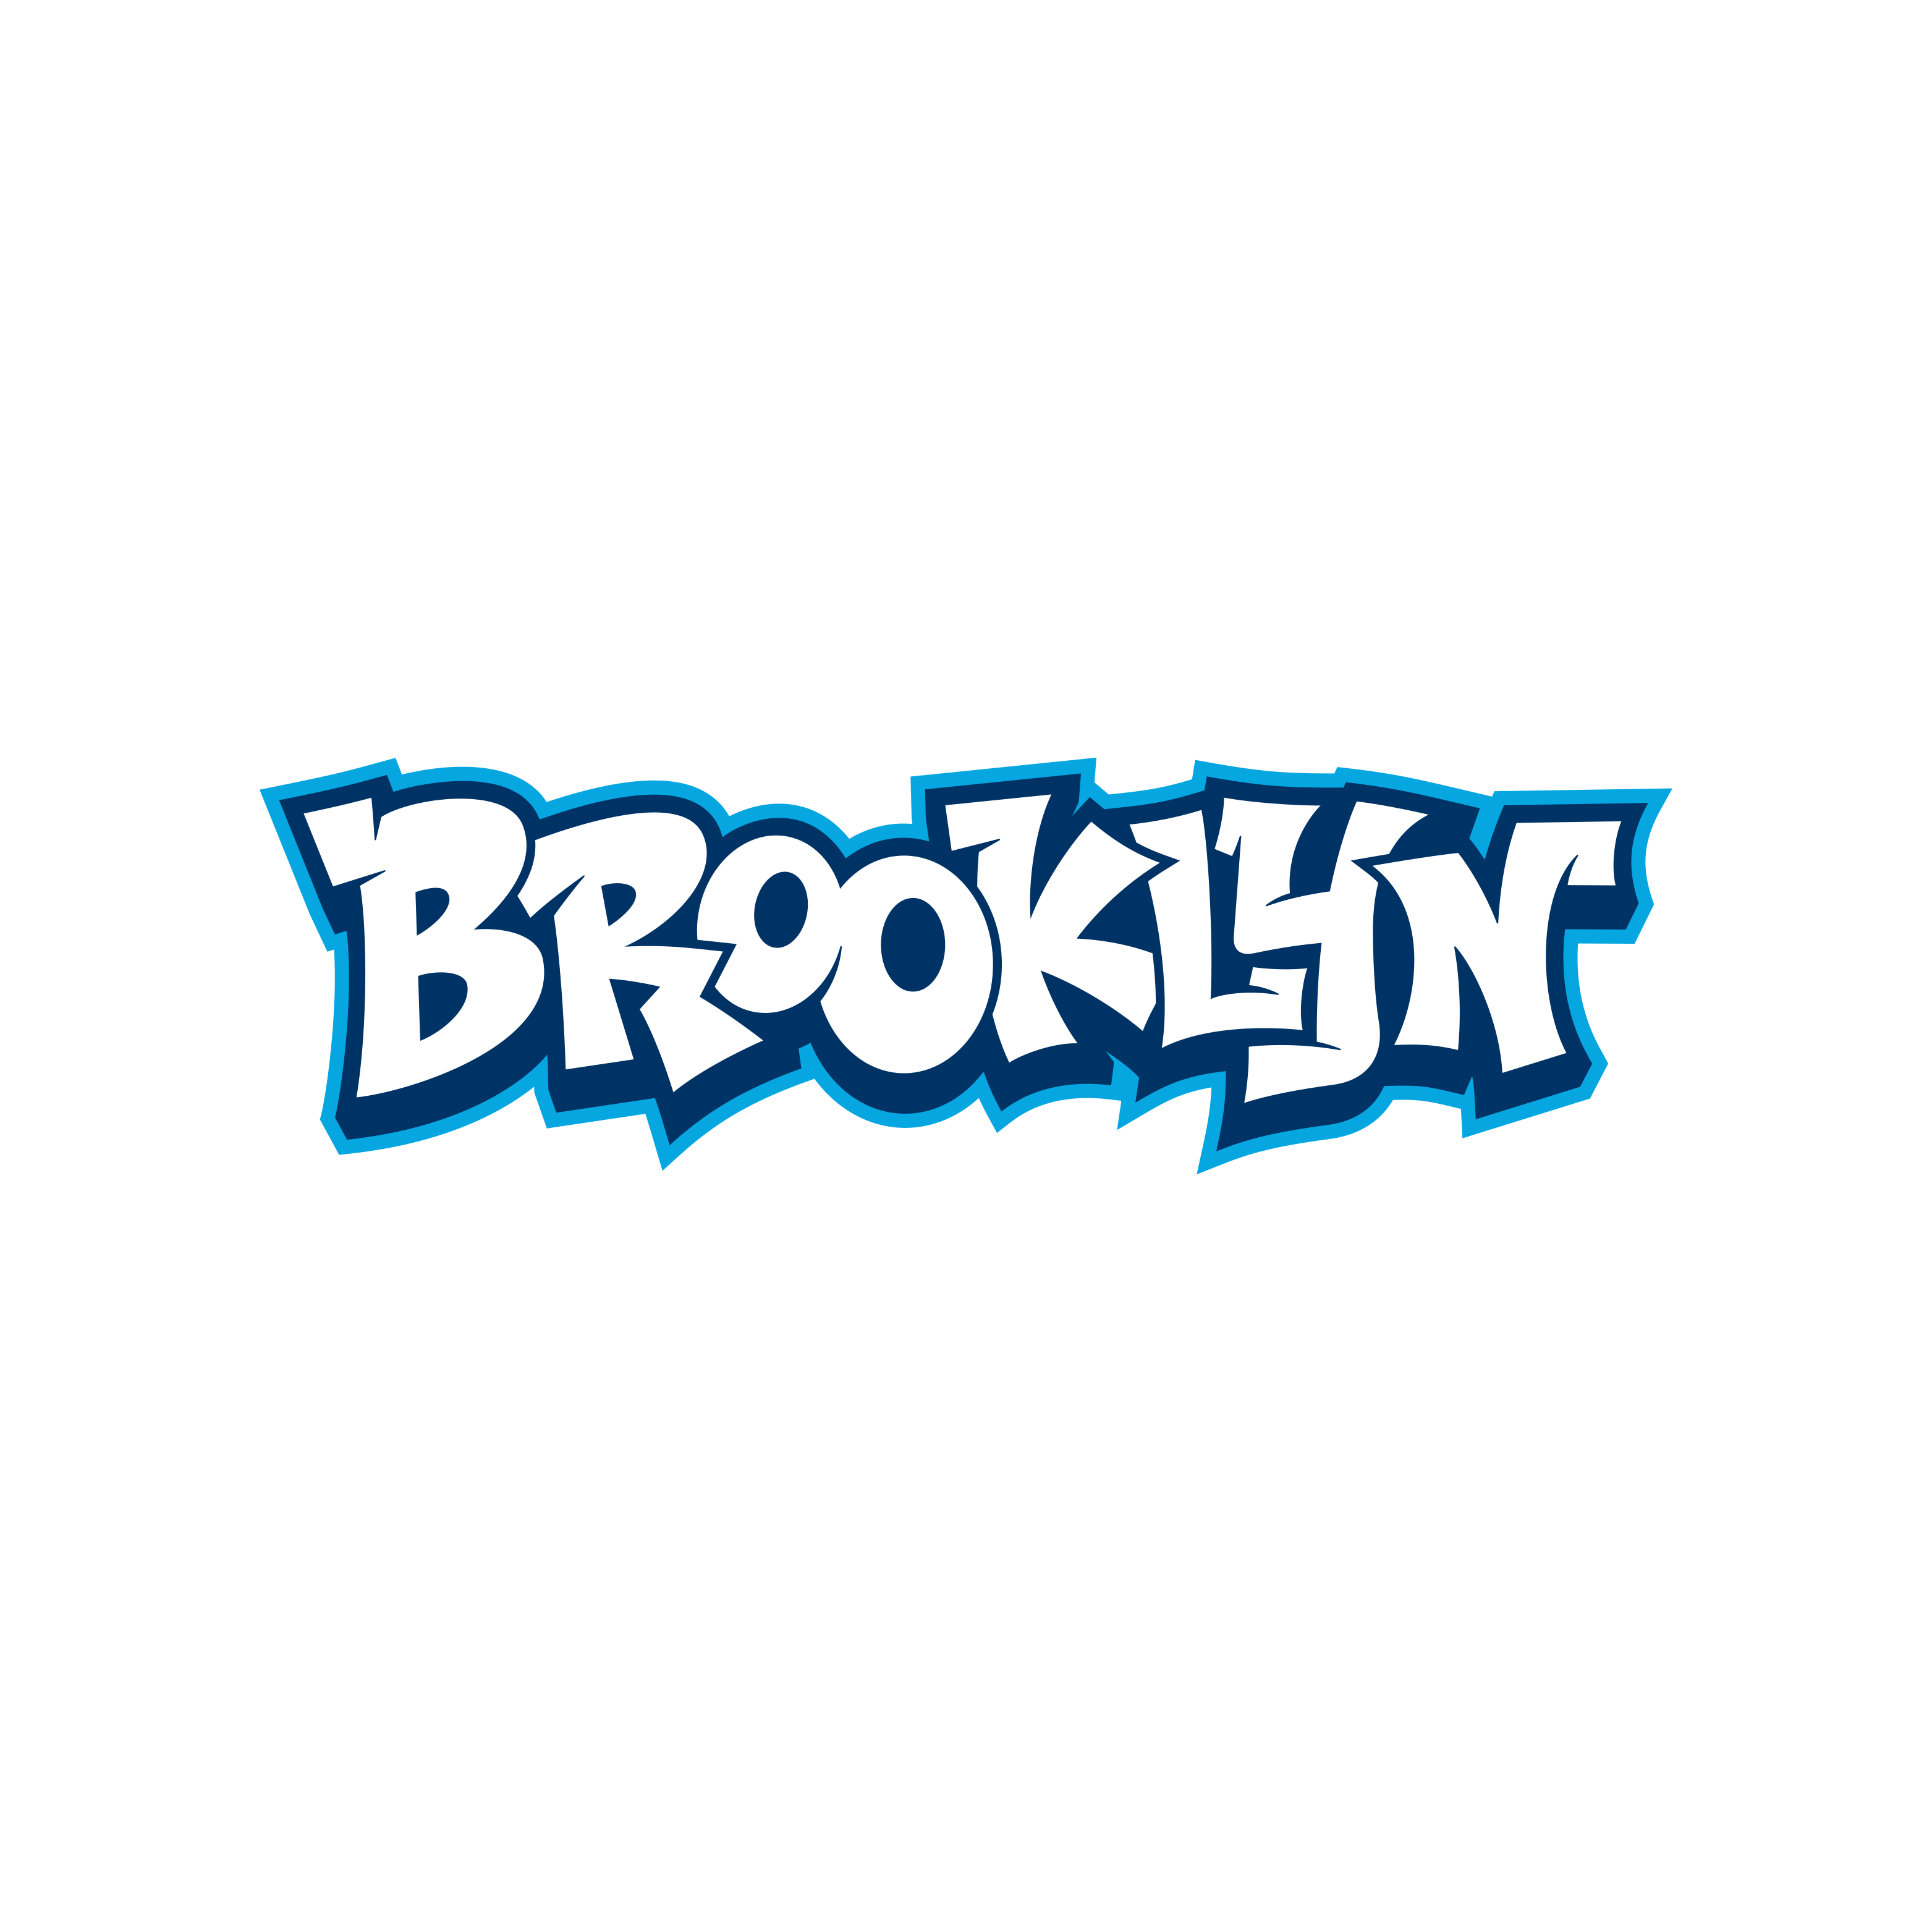 Brooklyn logo design by logo designer Glitschka Studios for your inspiration and for the worlds largest logo competition